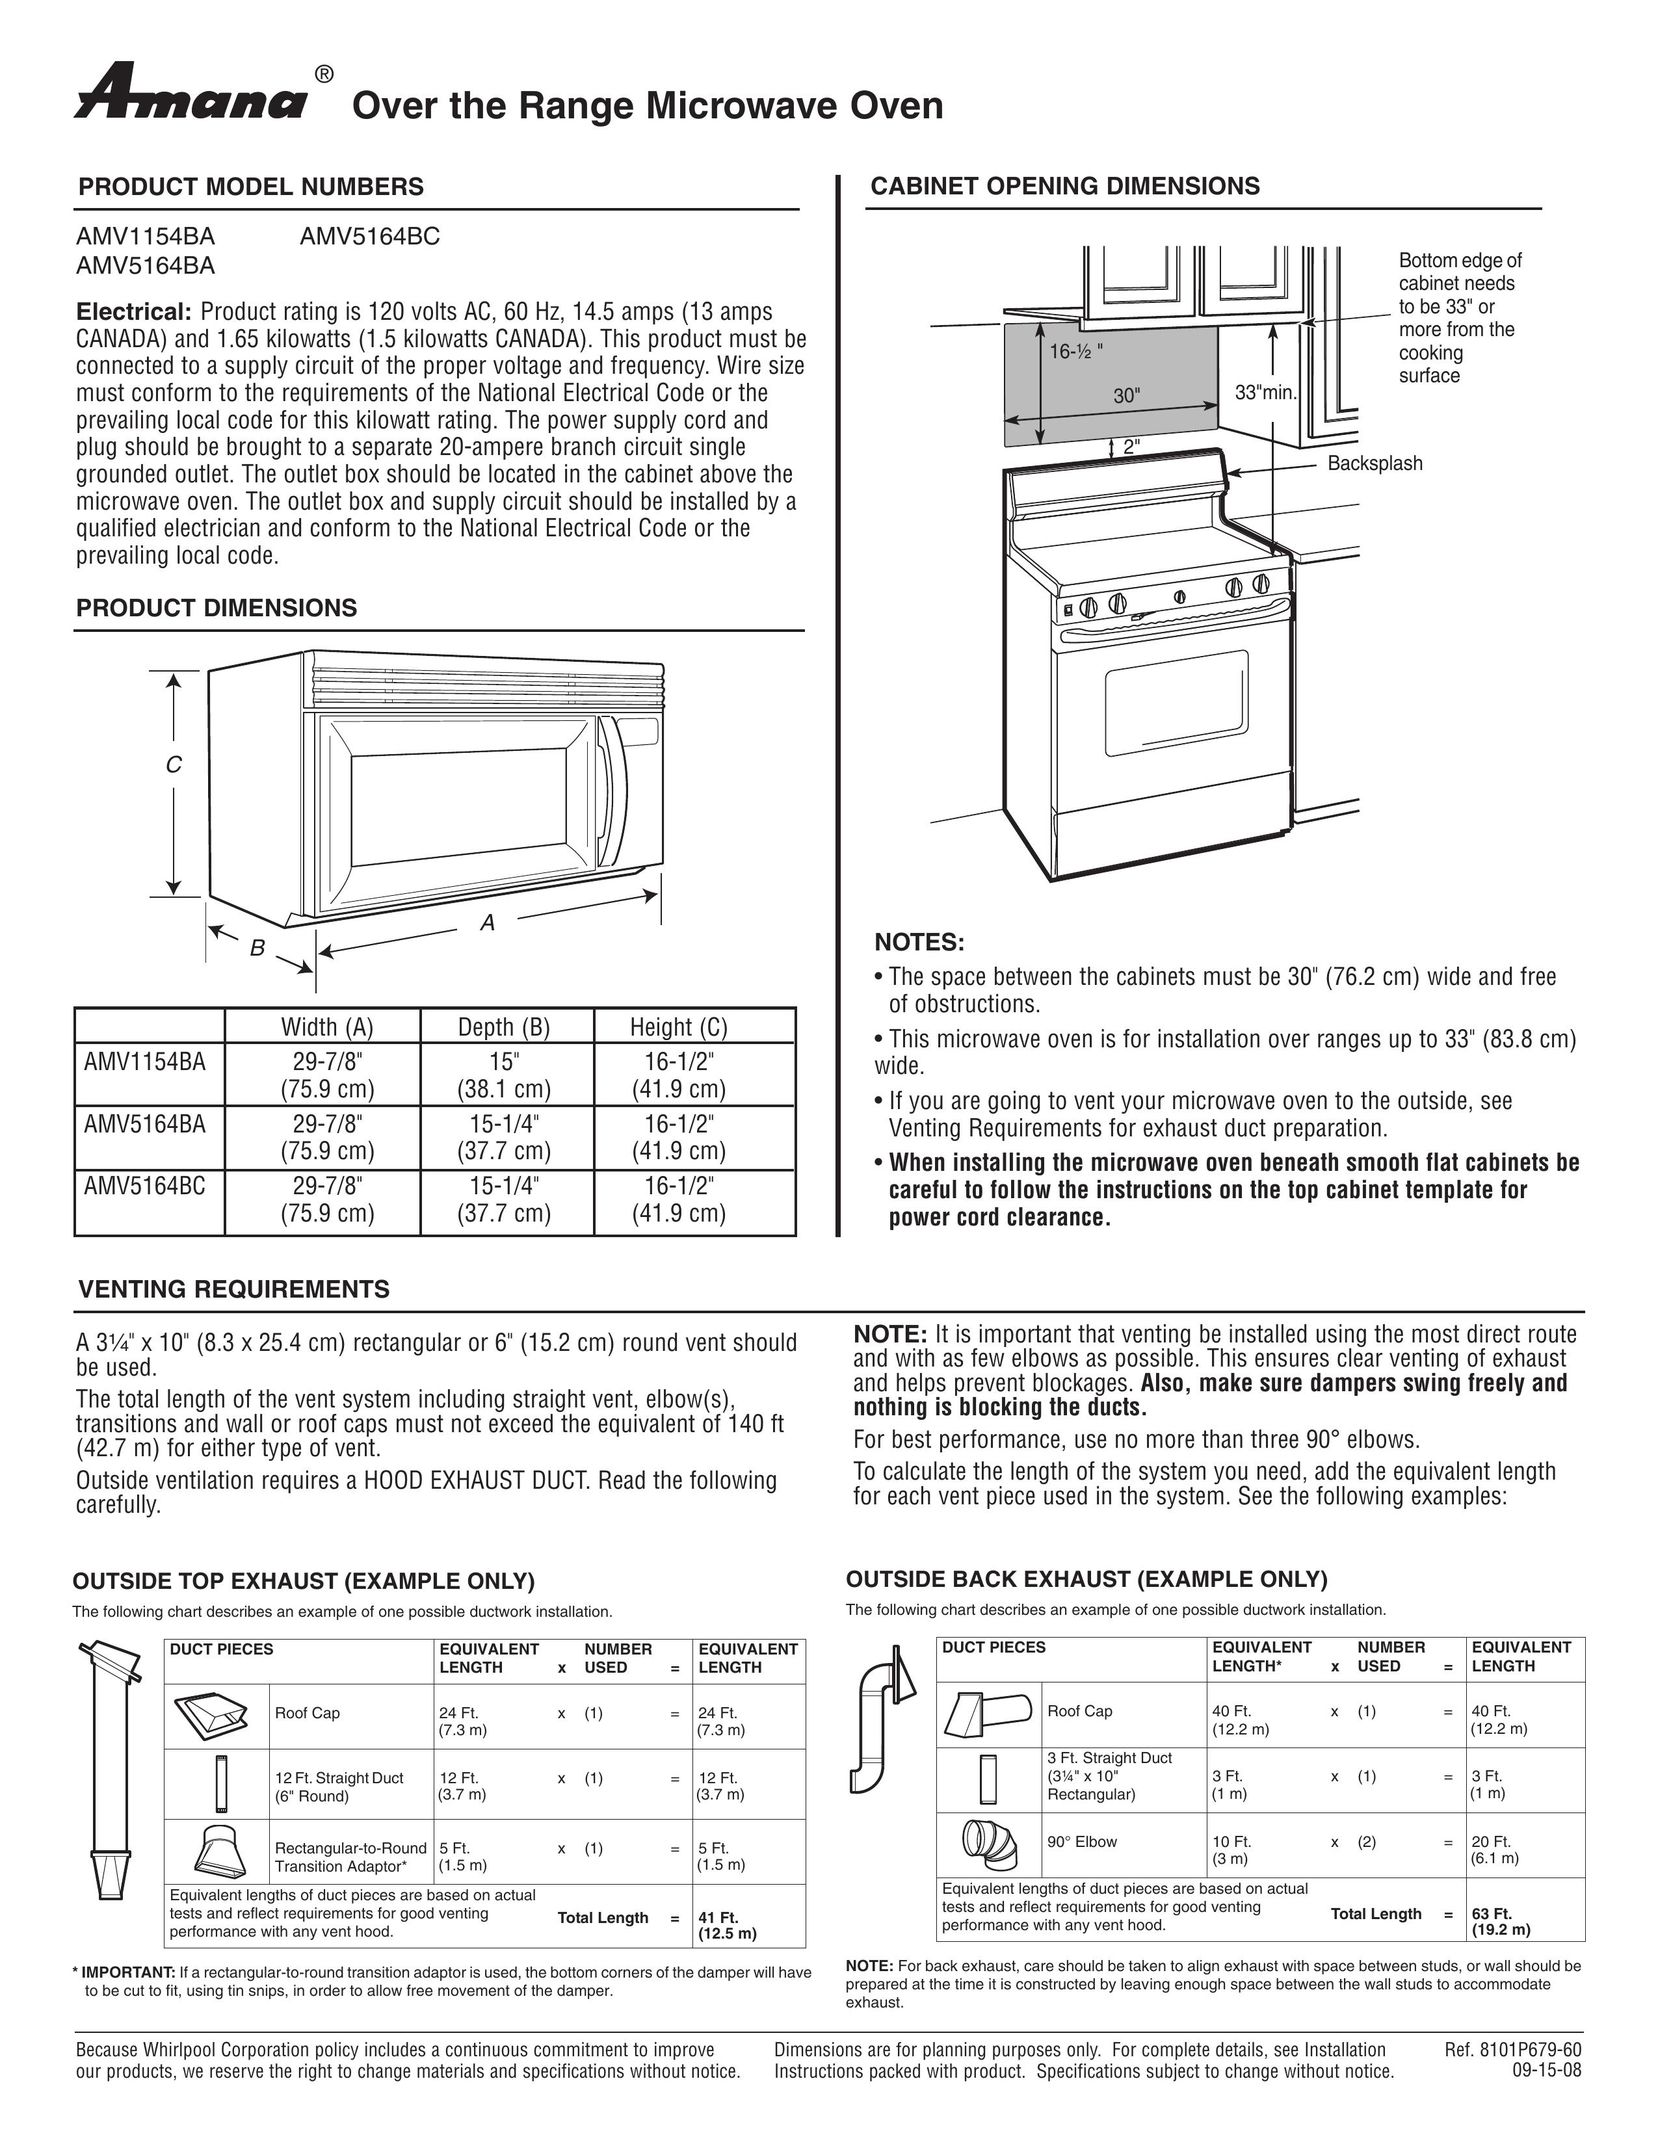 Amana AMV5164BC Microwave Oven User Manual